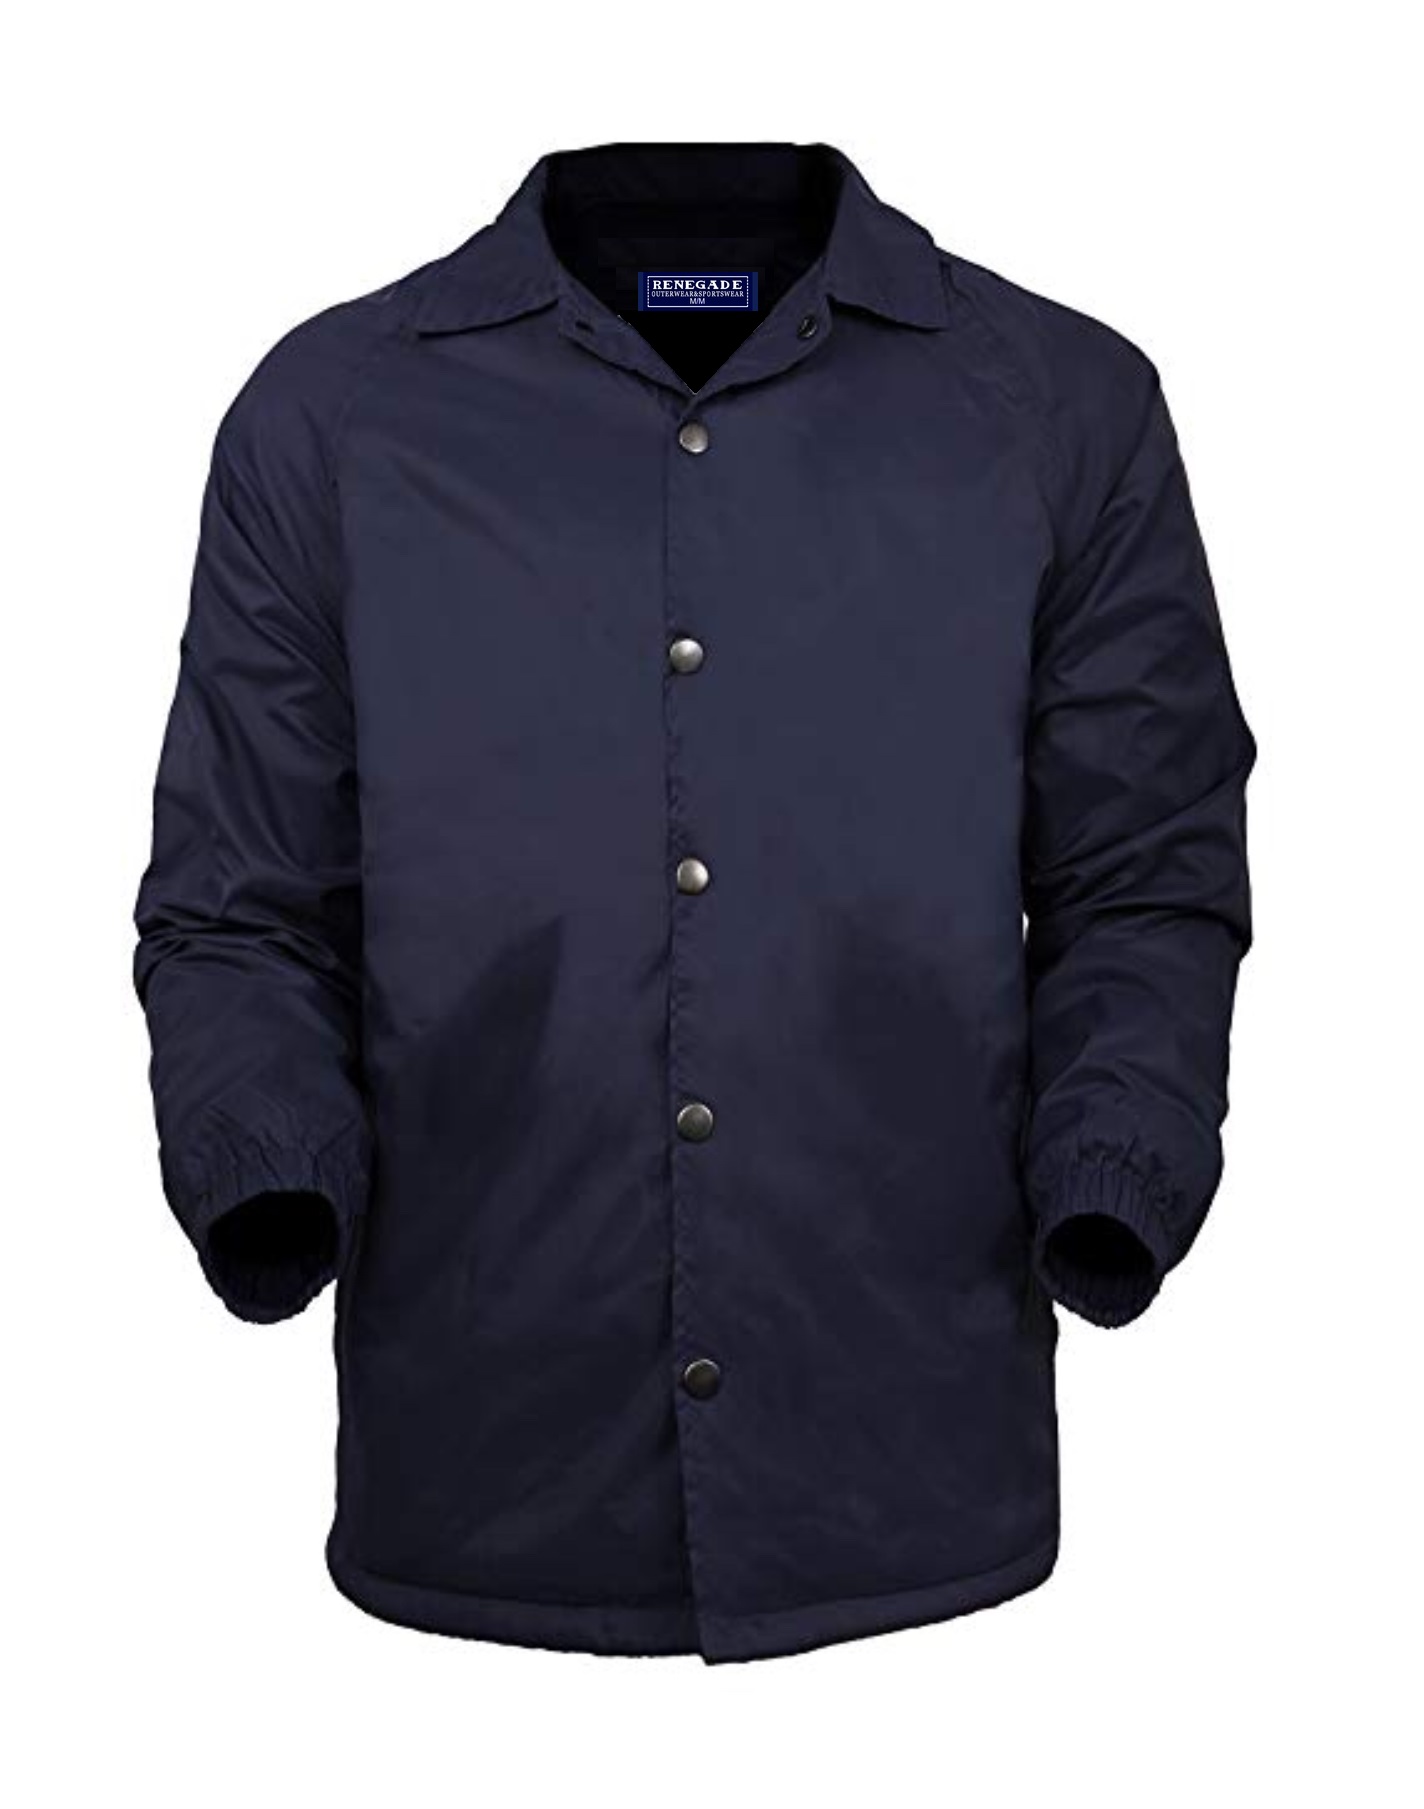 Men's coach jacket have evolved from their origins in athletic wear to become versatile staples in men's fashion.